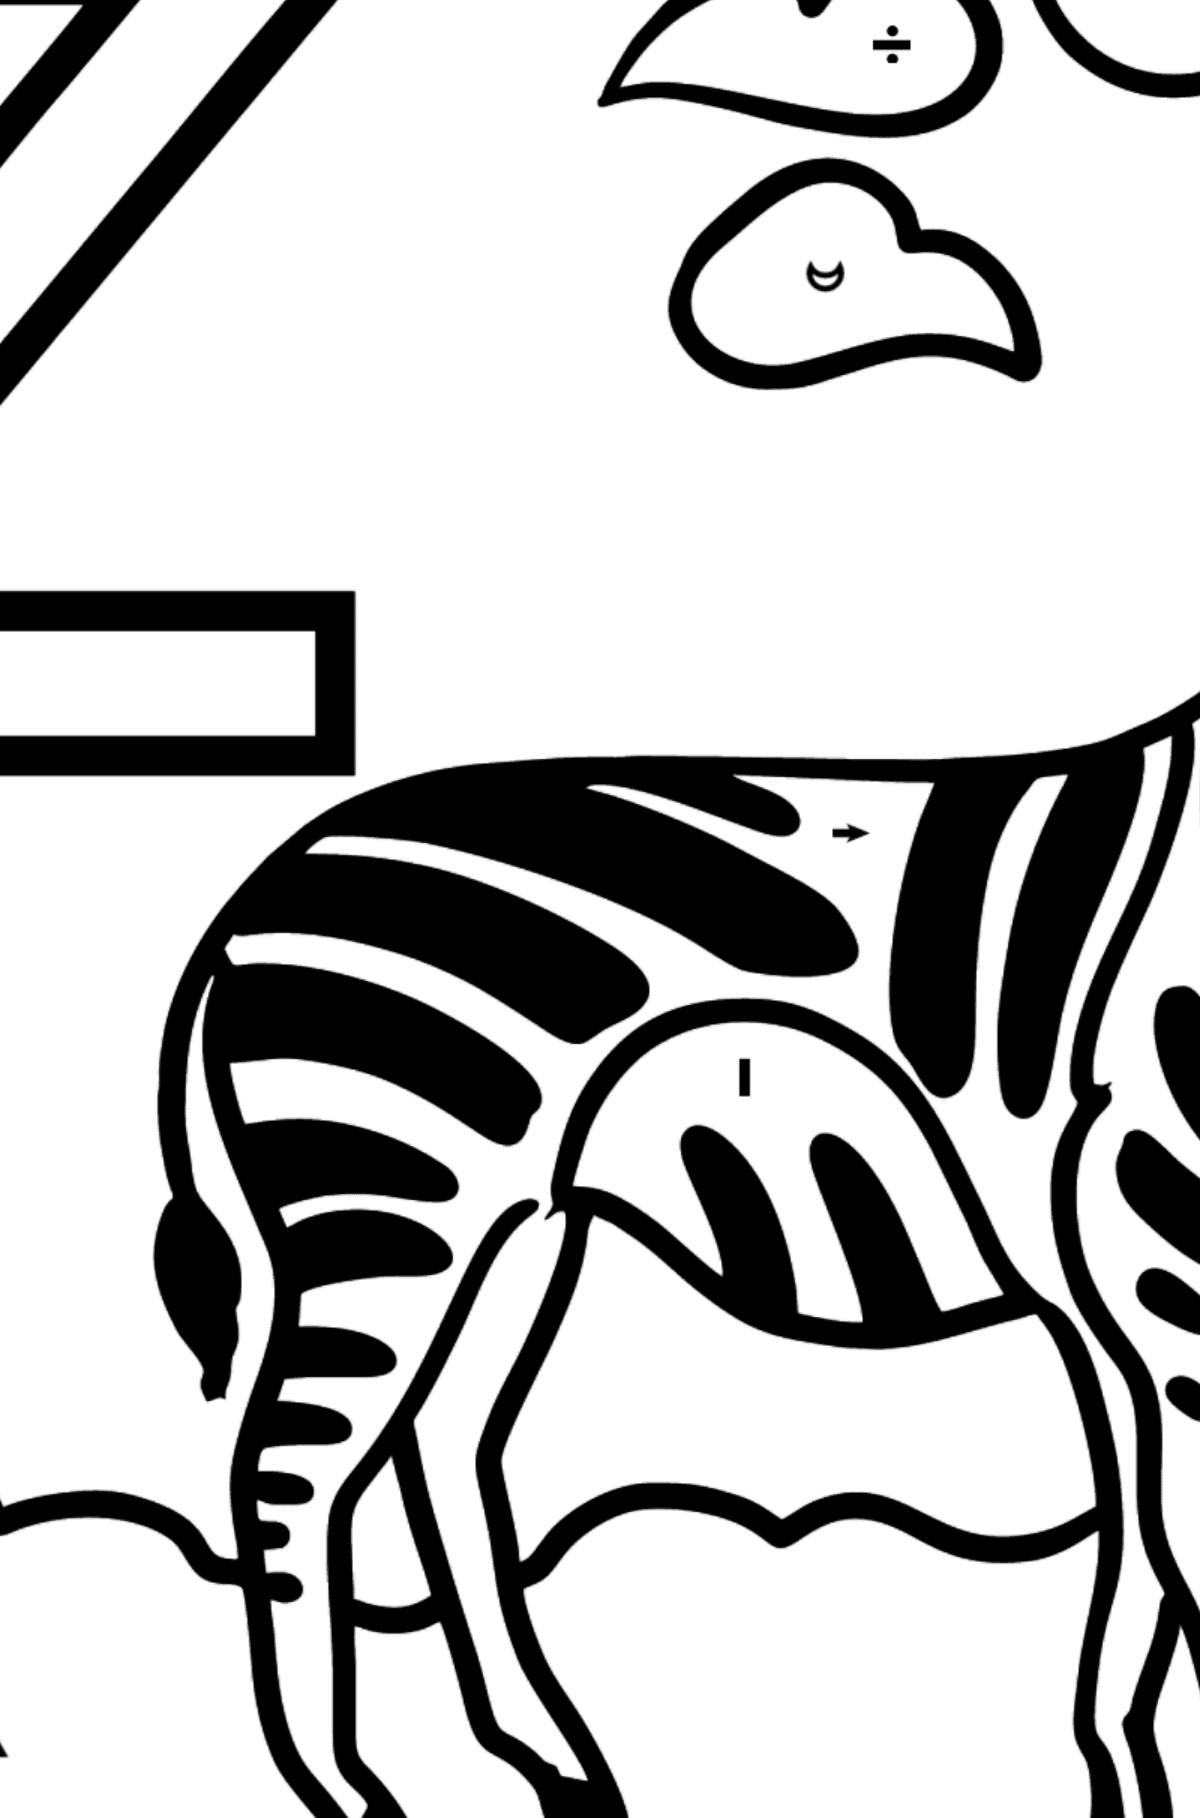 English Letter Z coloring pages - ZEBRA - Coloring by Symbols for Kids